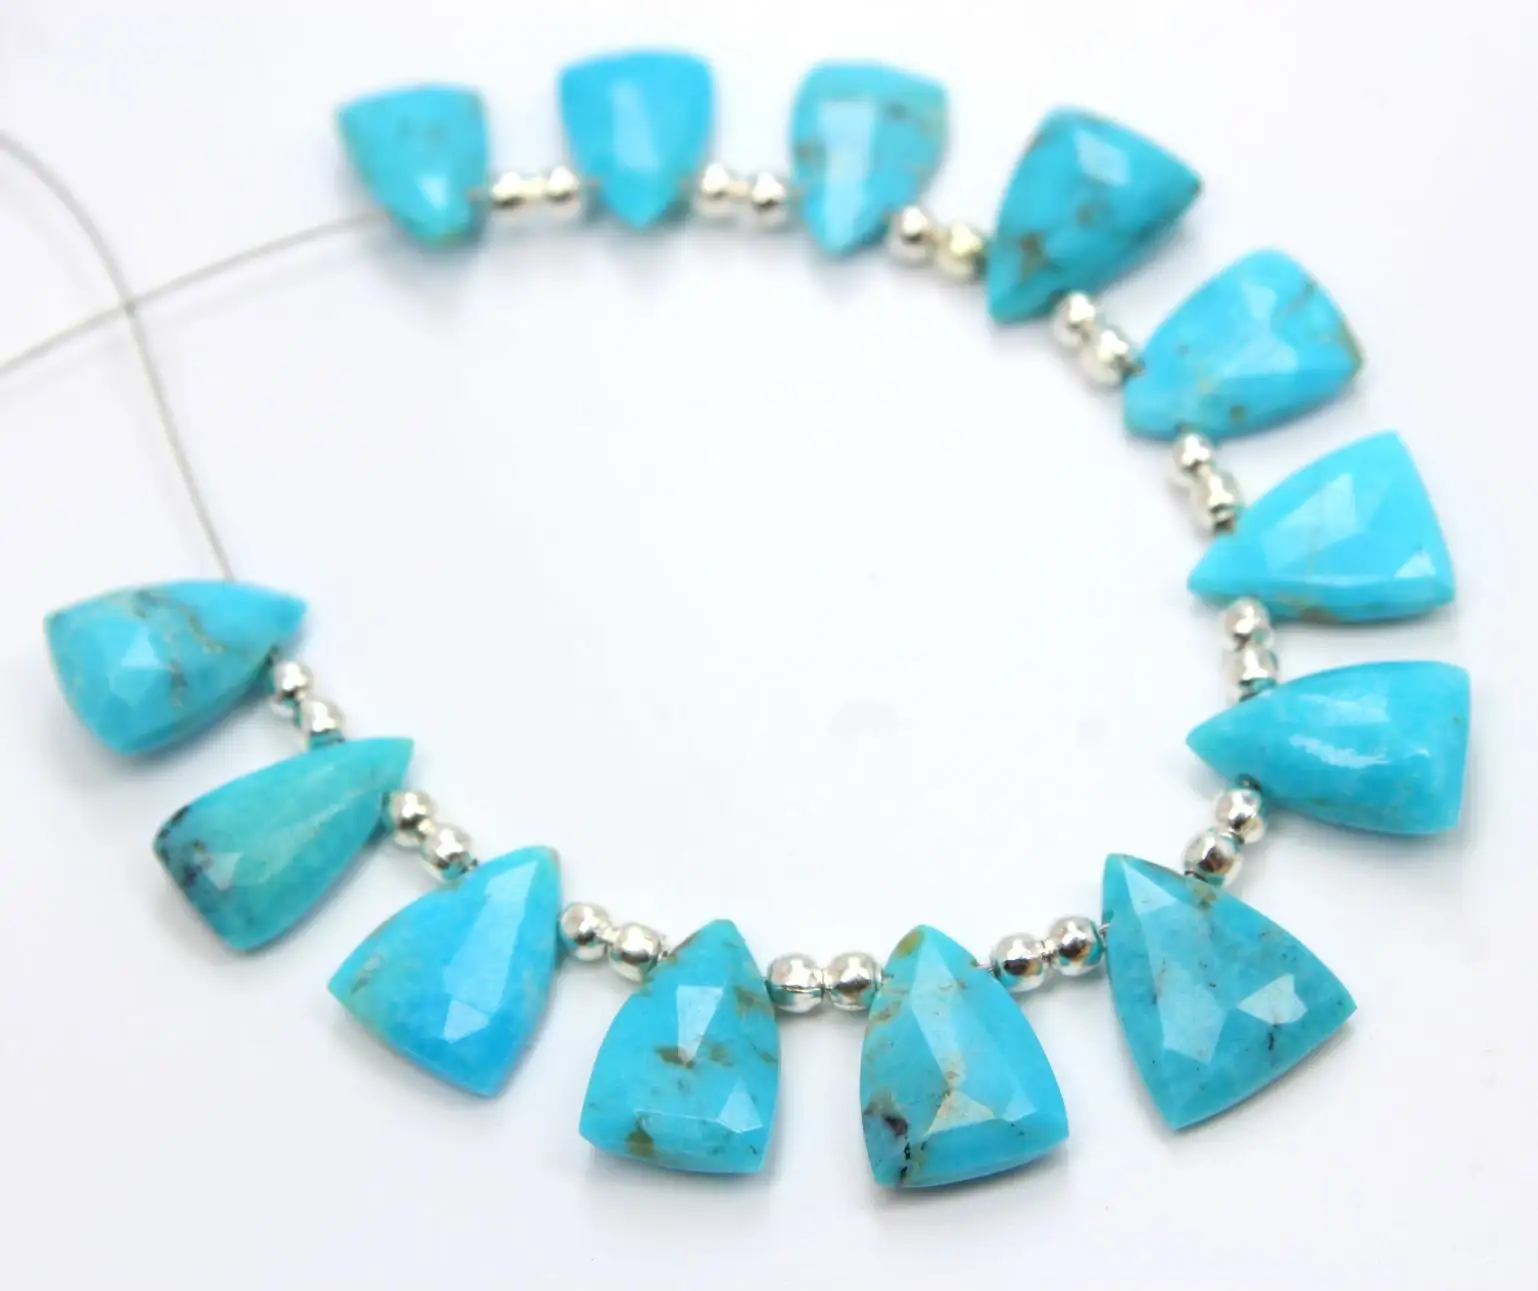 Natural Sleeping Beauty Arizona Turquoise Faceted Beads